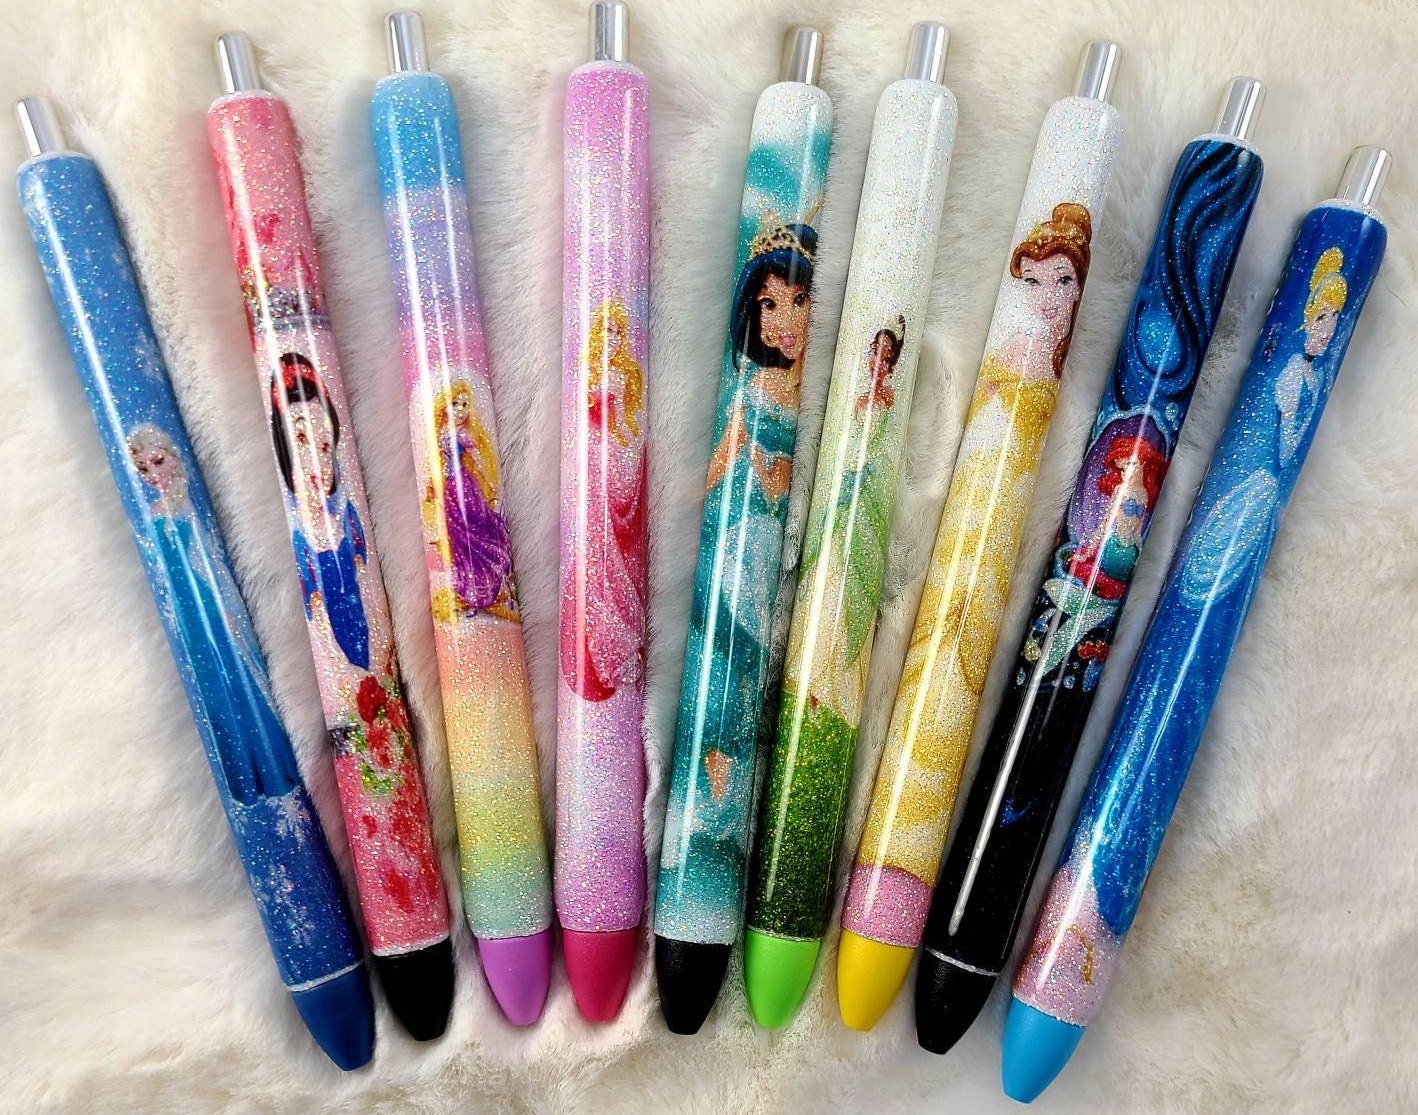 Princess Quote Gold Pens: Ariel, Moana, Belle set of 3/ Disney Mickey Inspo  Stationery Ballpoint Black Writing Planner Journal Supplies 